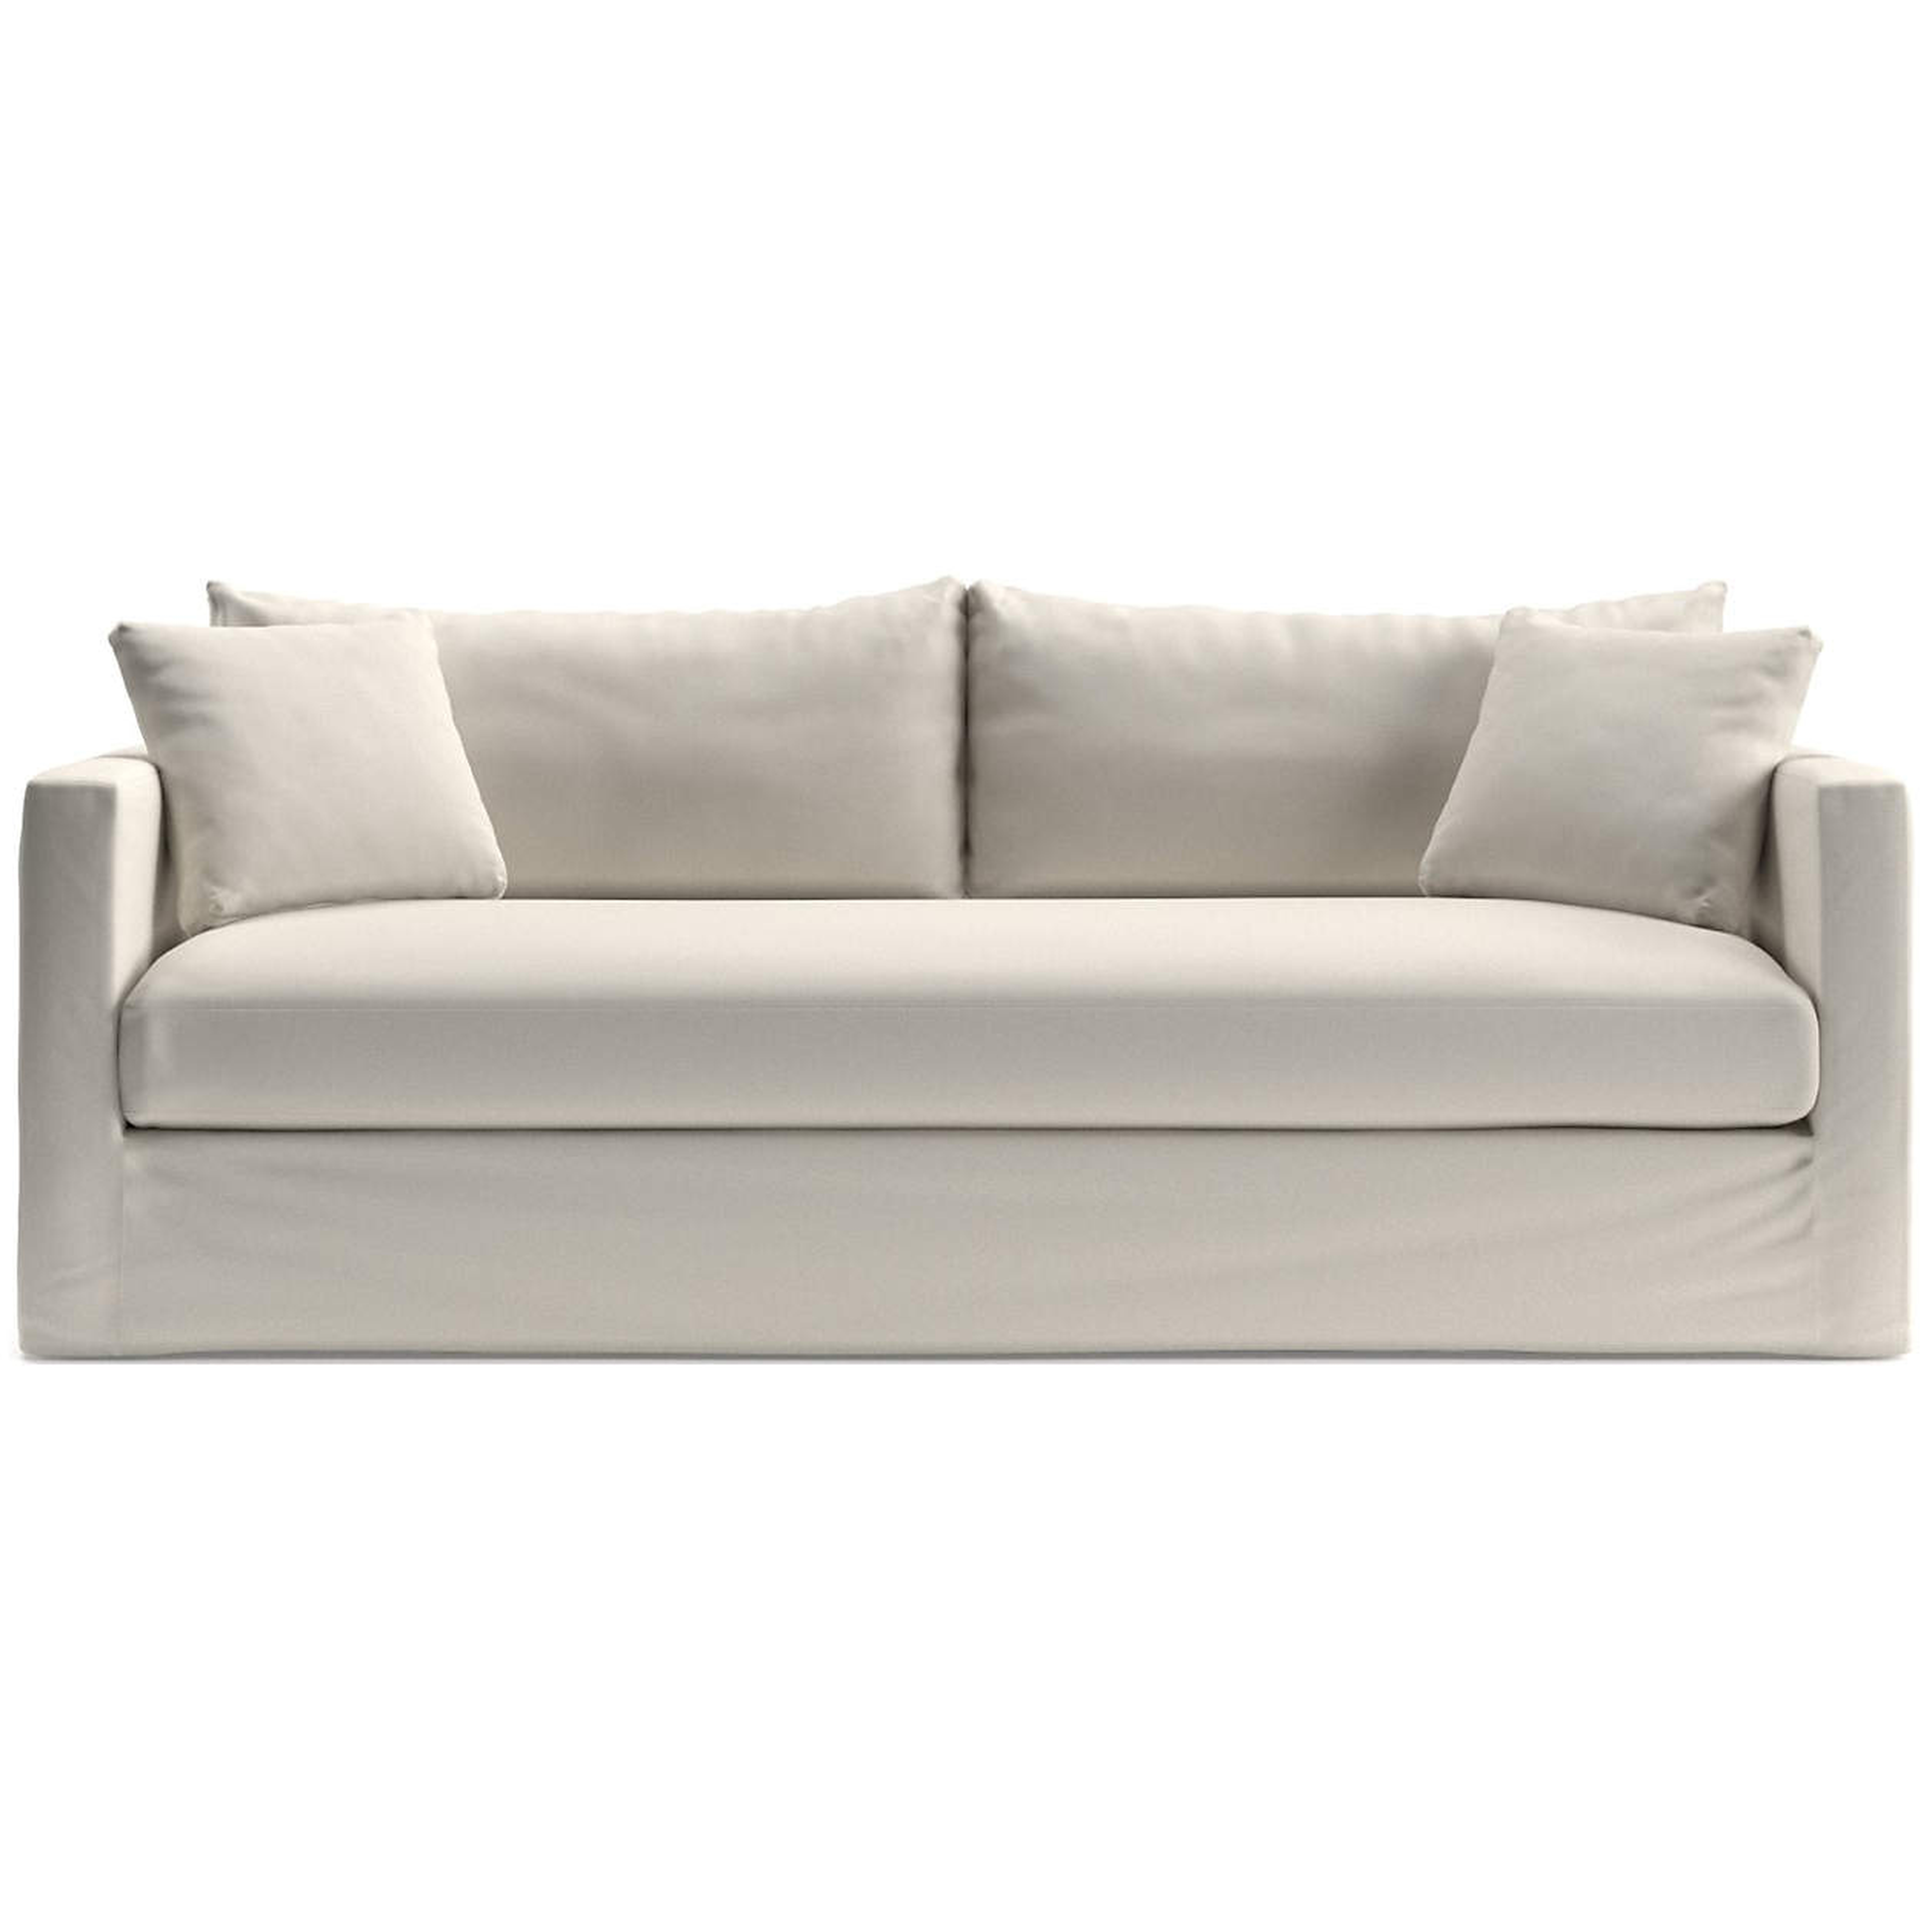 Willow II Slipcovered Apartment Sofa - Crate and Barrel